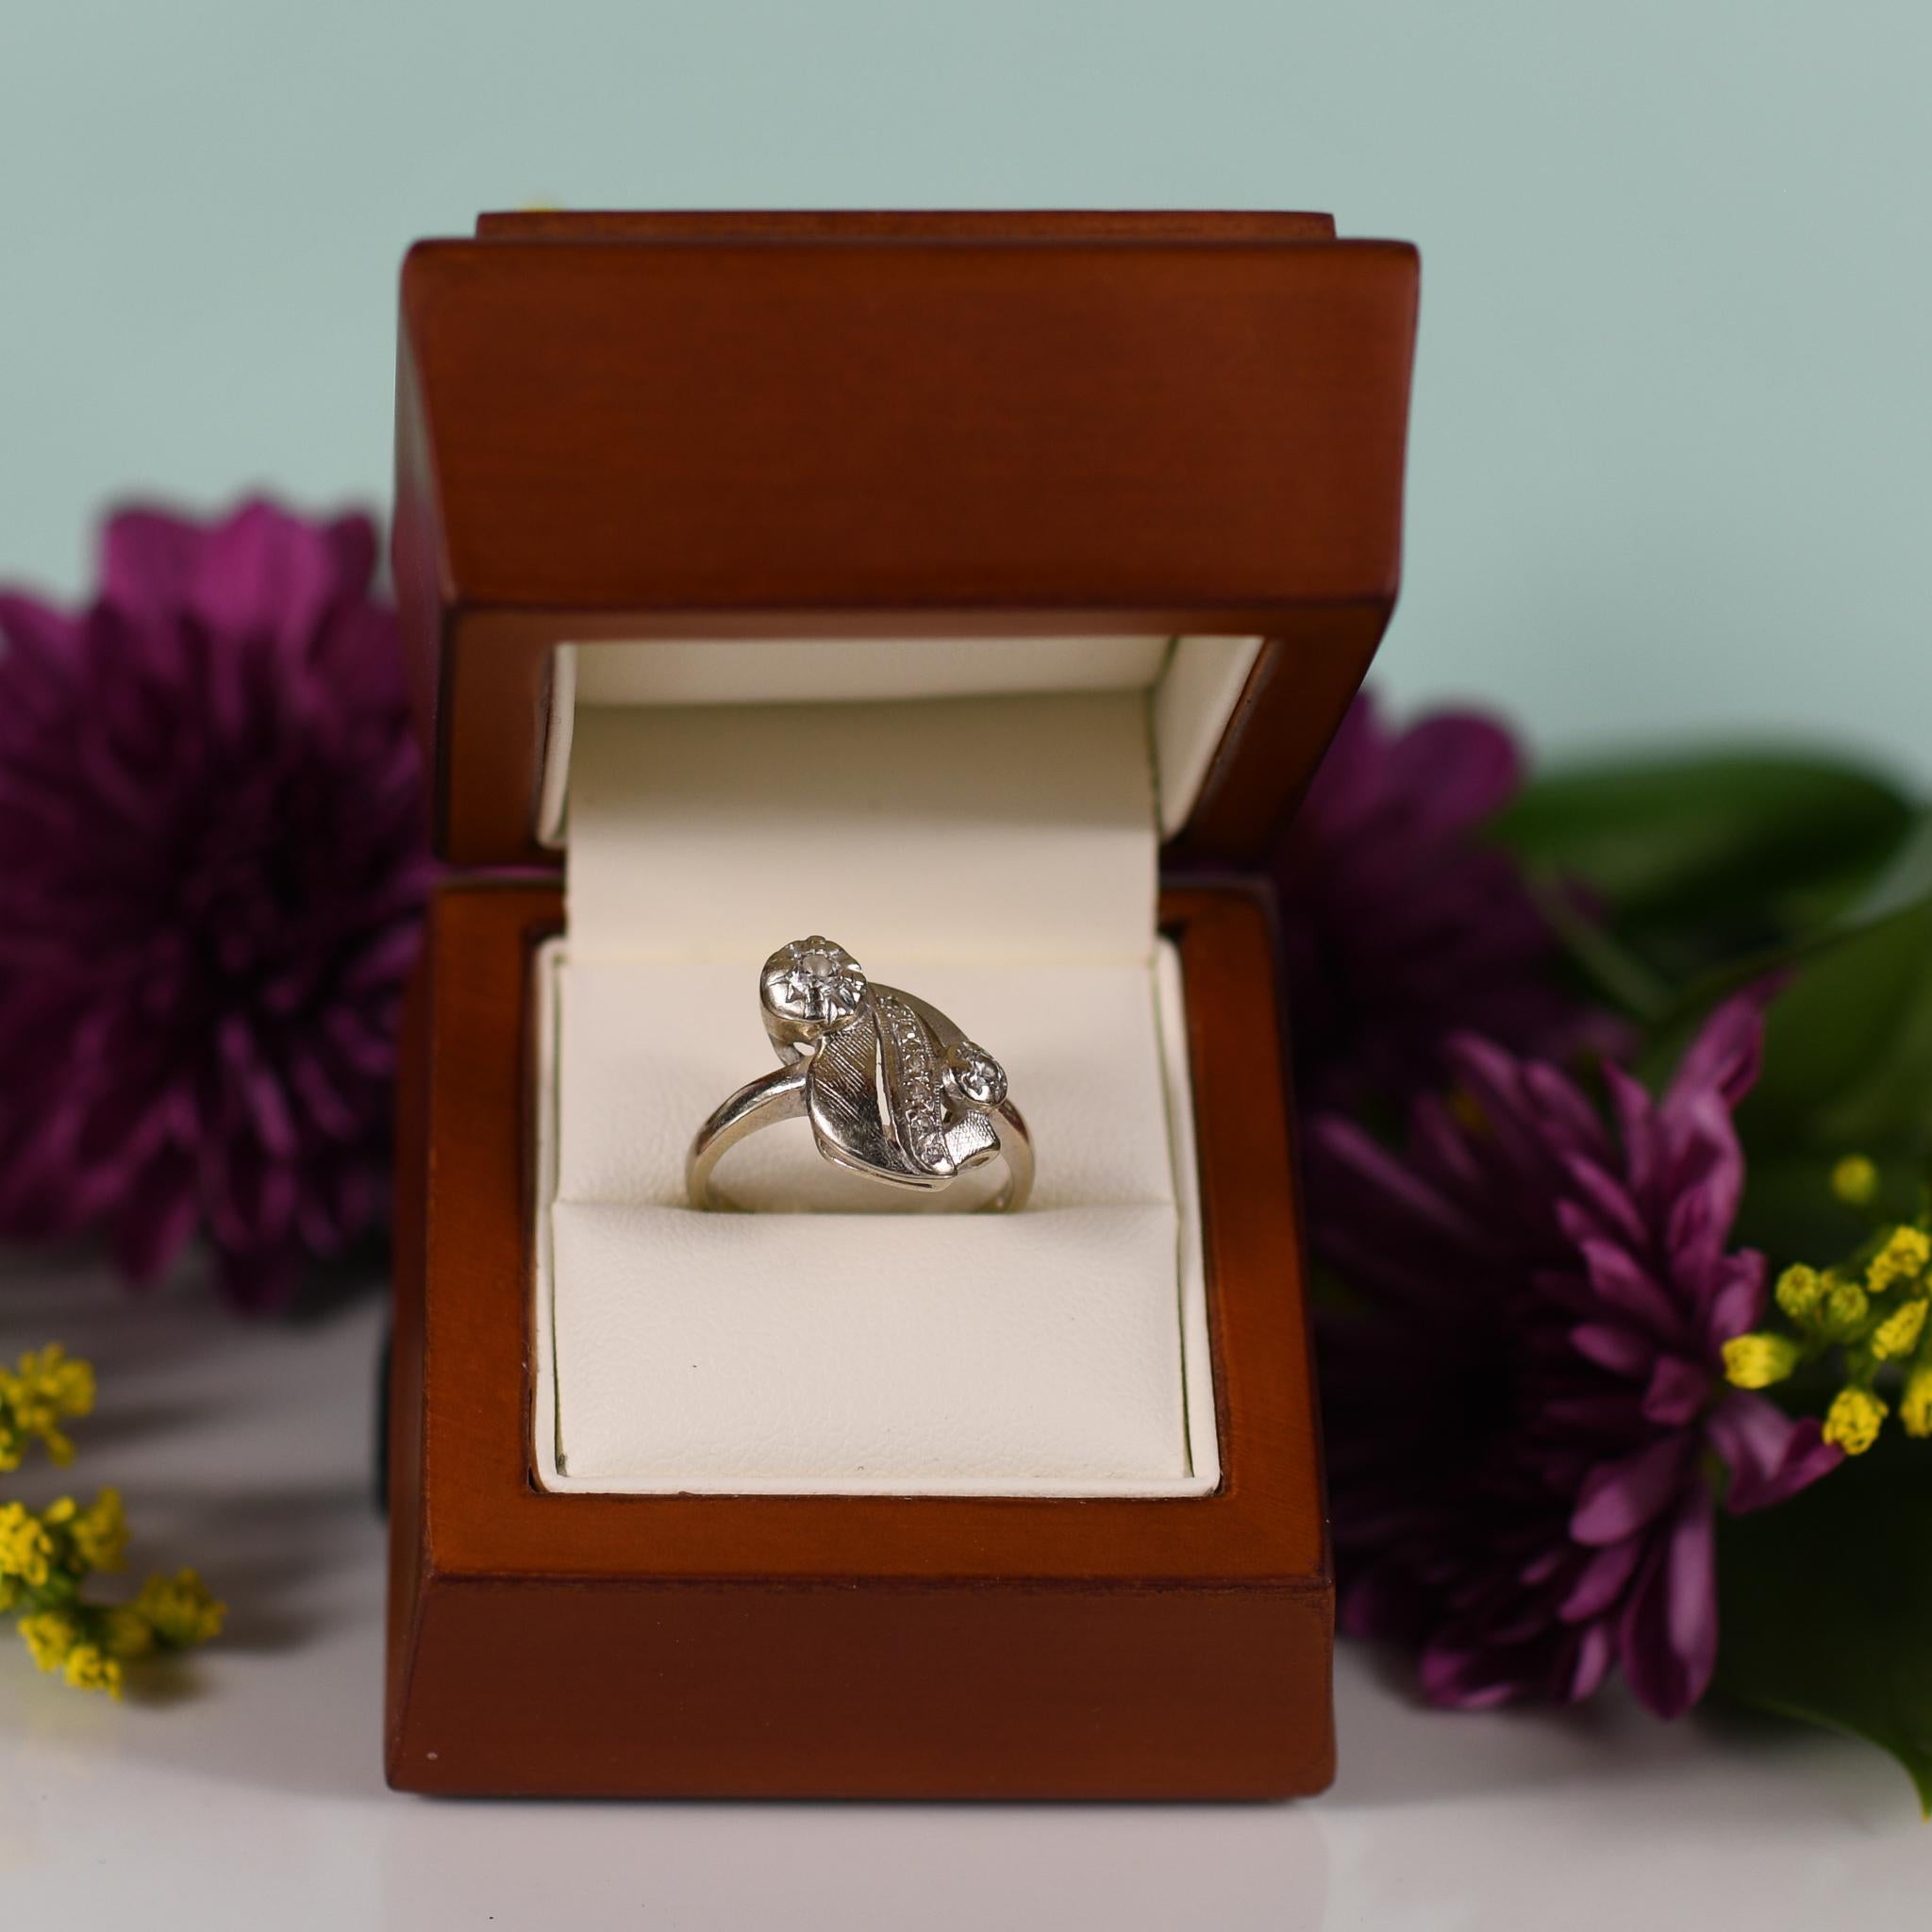 Evoke the timeless elegance of the mid-century era with this exquisite leaf-like diamond ring, crafted in lustrous 14k white gold. Inspired by the natural beauty of foliage, the intricate design features delicate diamond-encrusted leaves, each